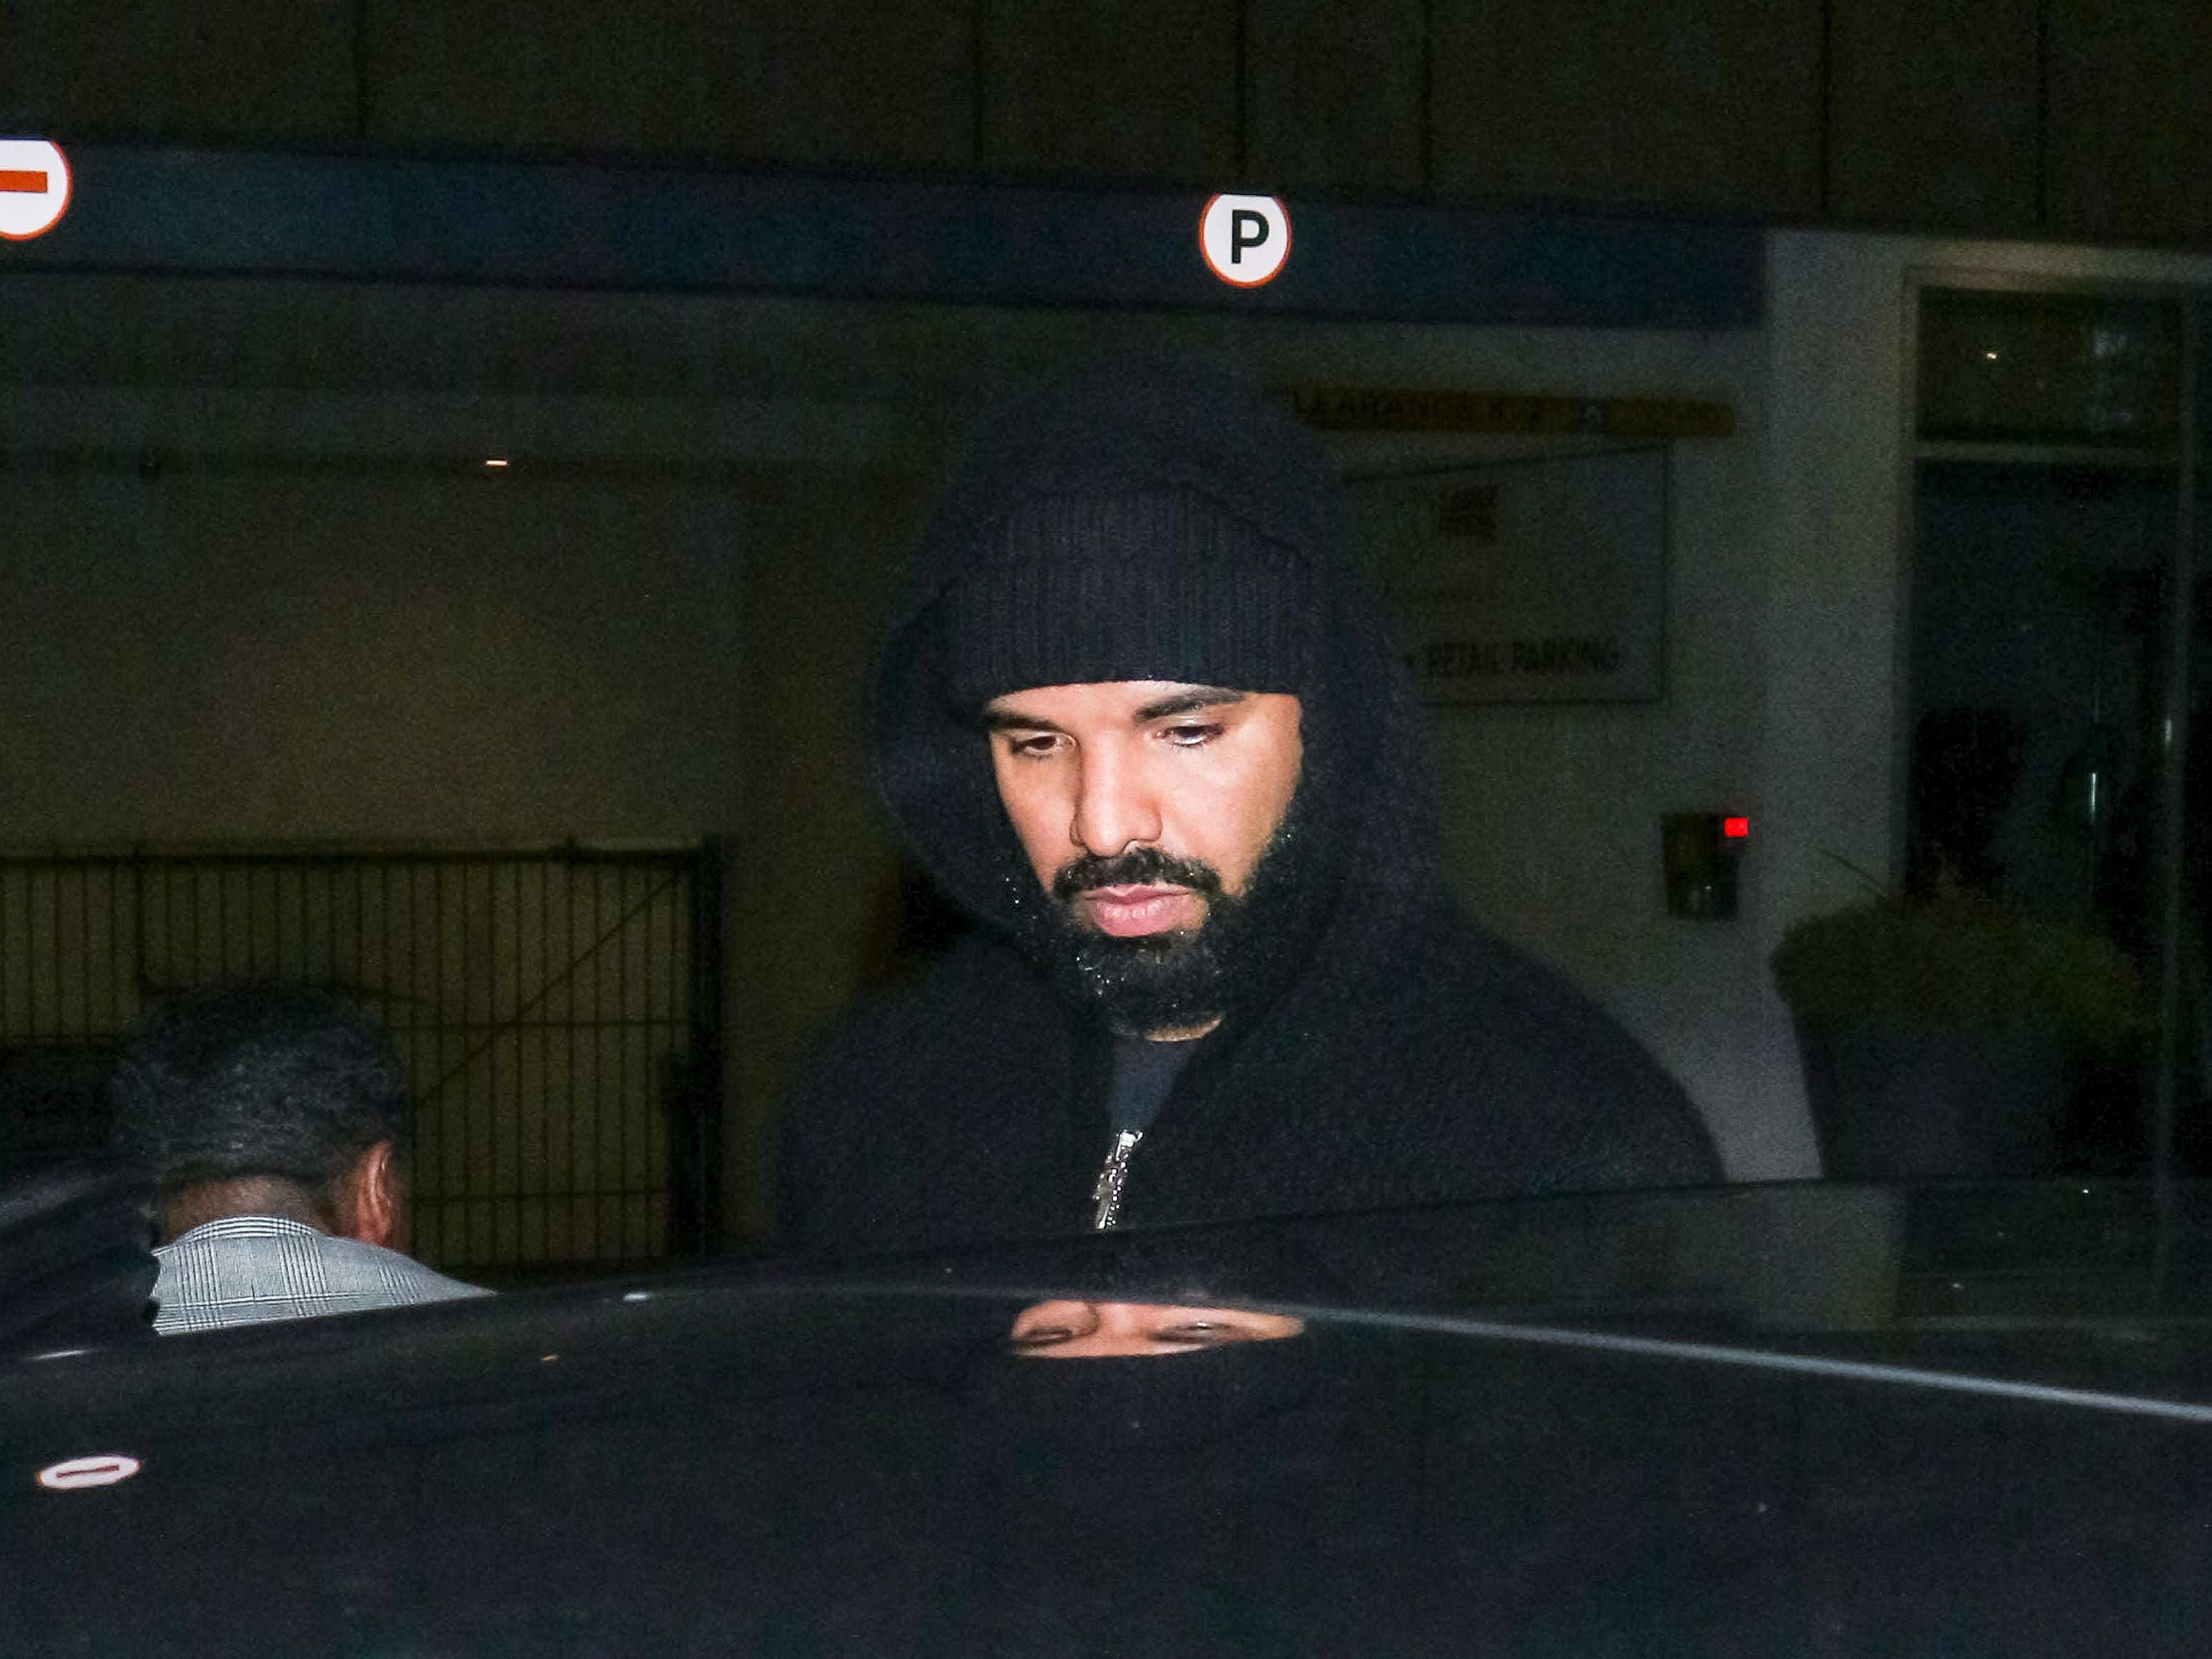 LOS ANGELES, CA - MARCH 10: Drake is seen on March 10, 2020 in Los Angeles, California. (Photo by TM/Bauer-Griffin/GC Images)